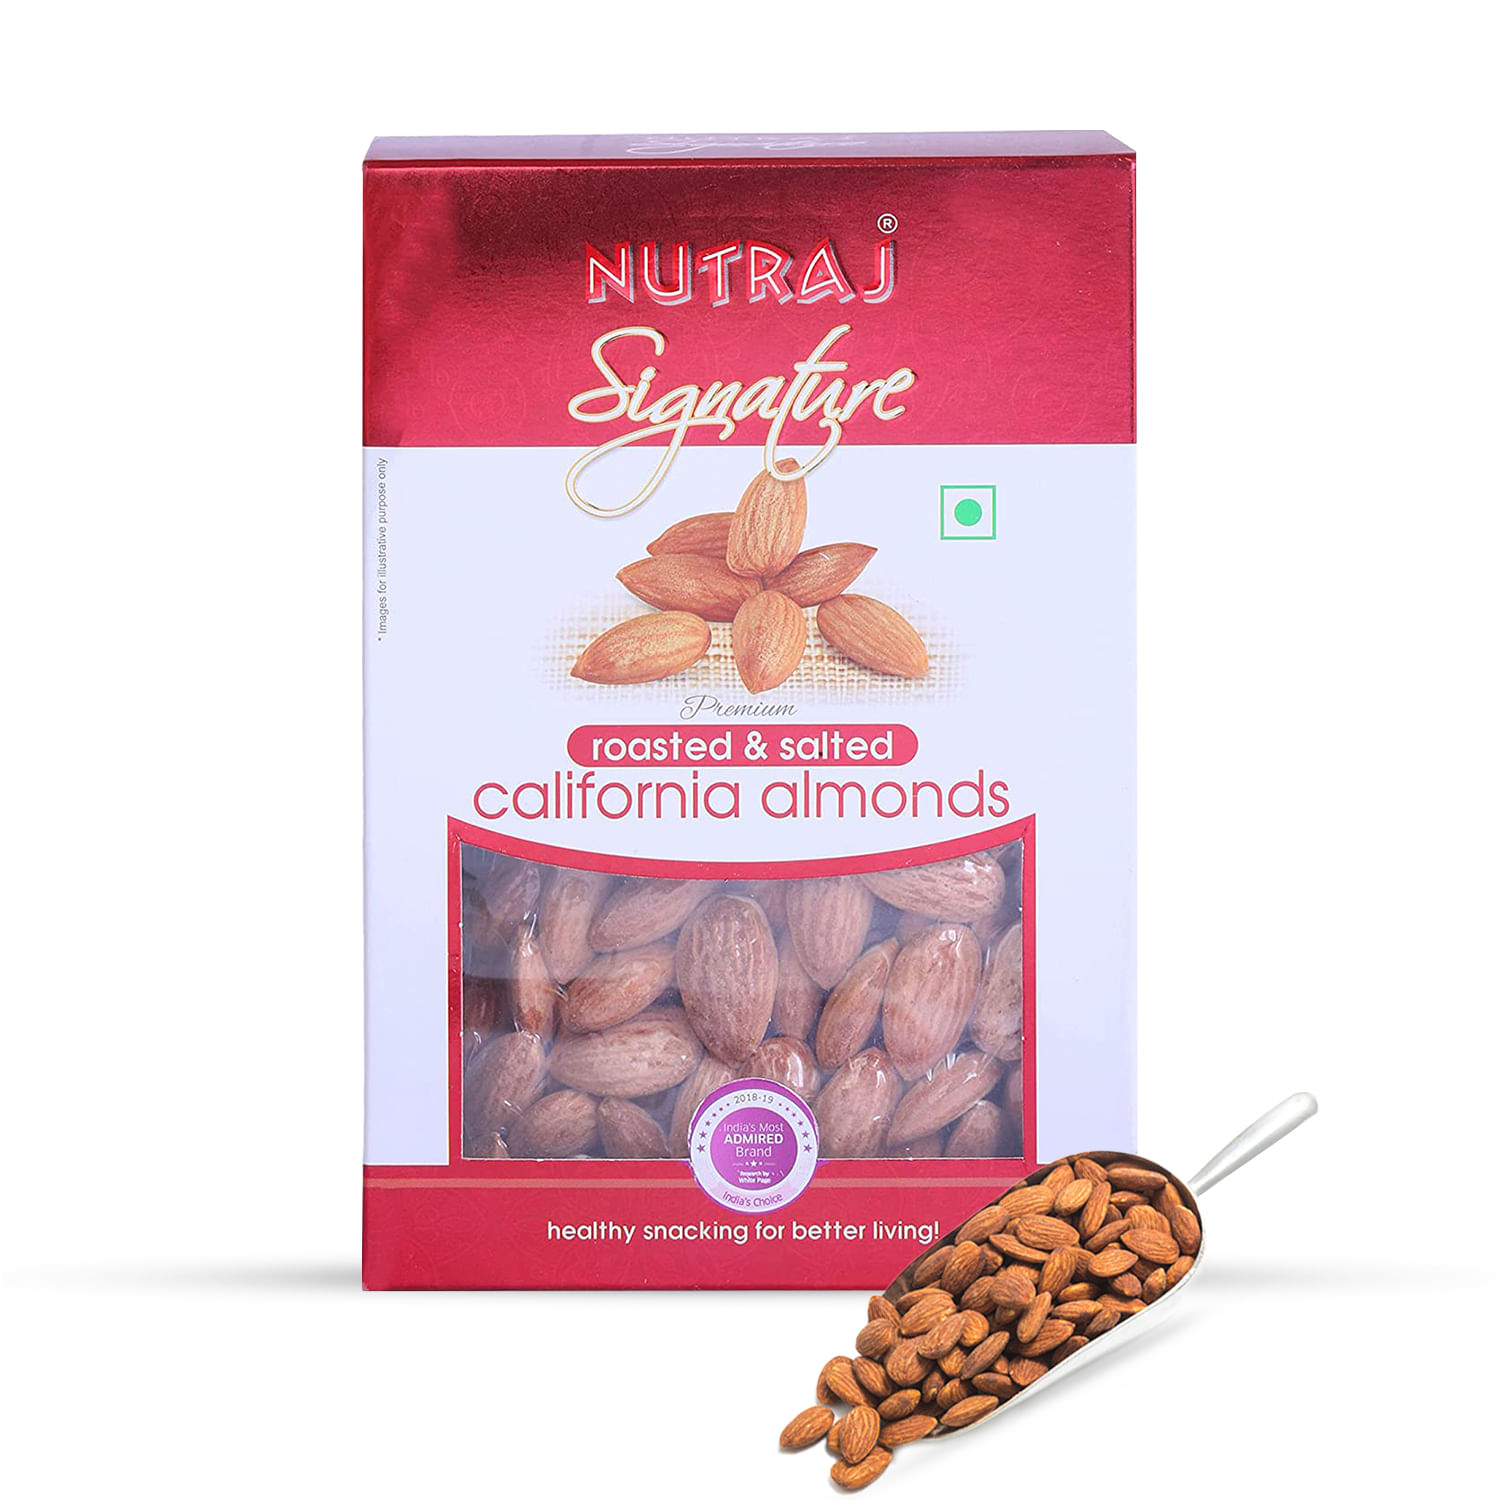 Nutraj Signature Roasted and Salted California Almonds 400g (2 X 200g) - Vacuum Pack